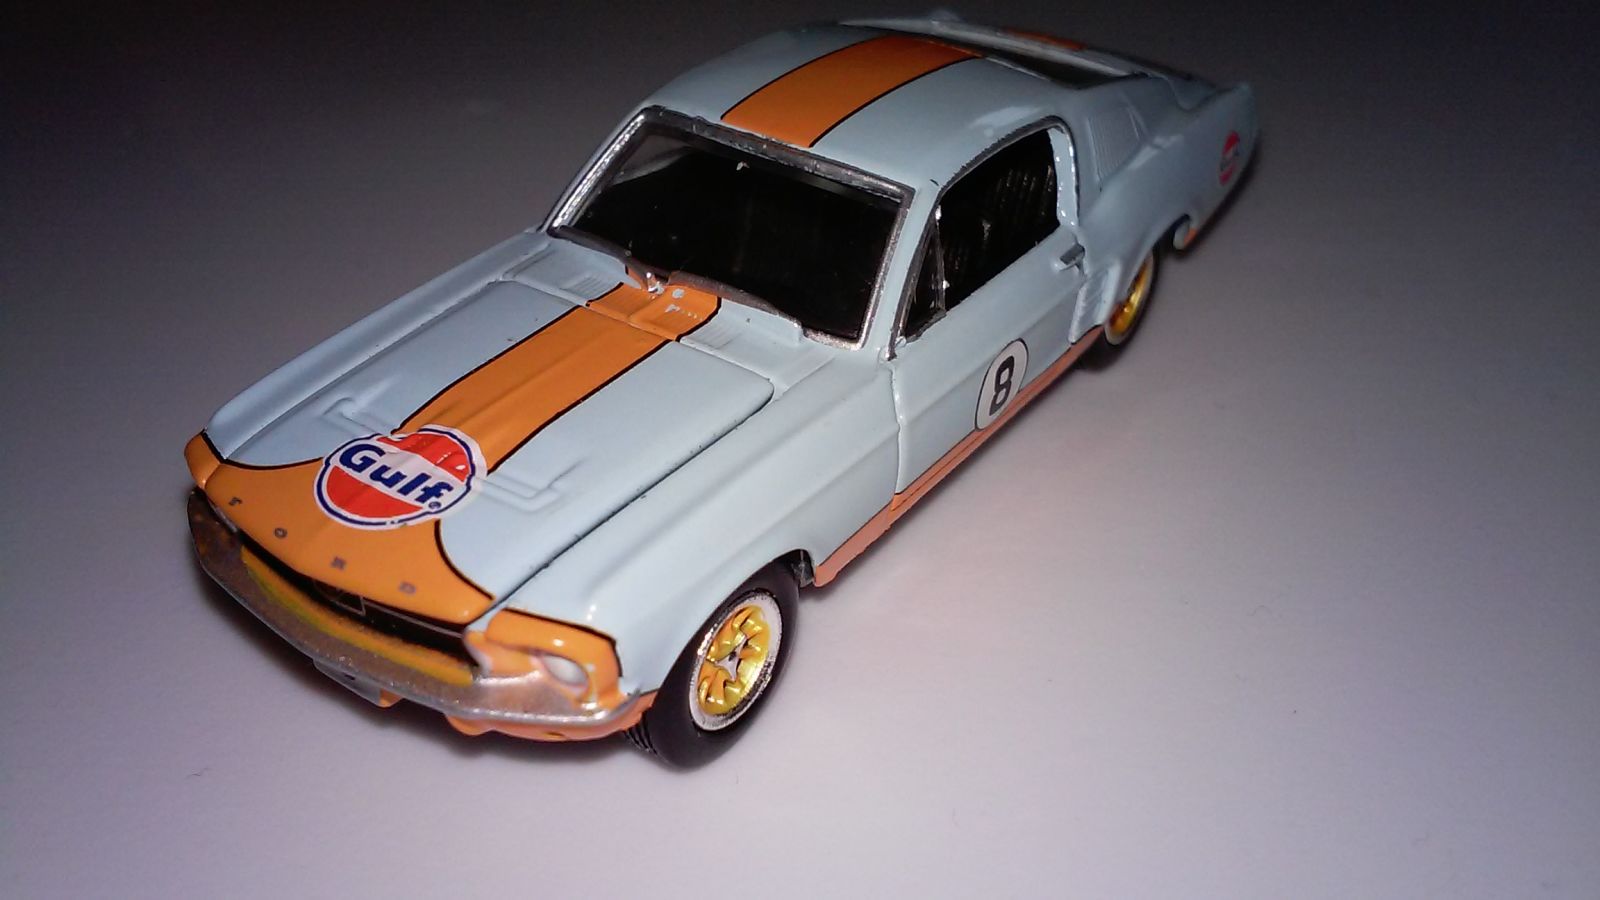 Illustration for article titled Greenlight 1967 Ford Mustang in Gulf livery.